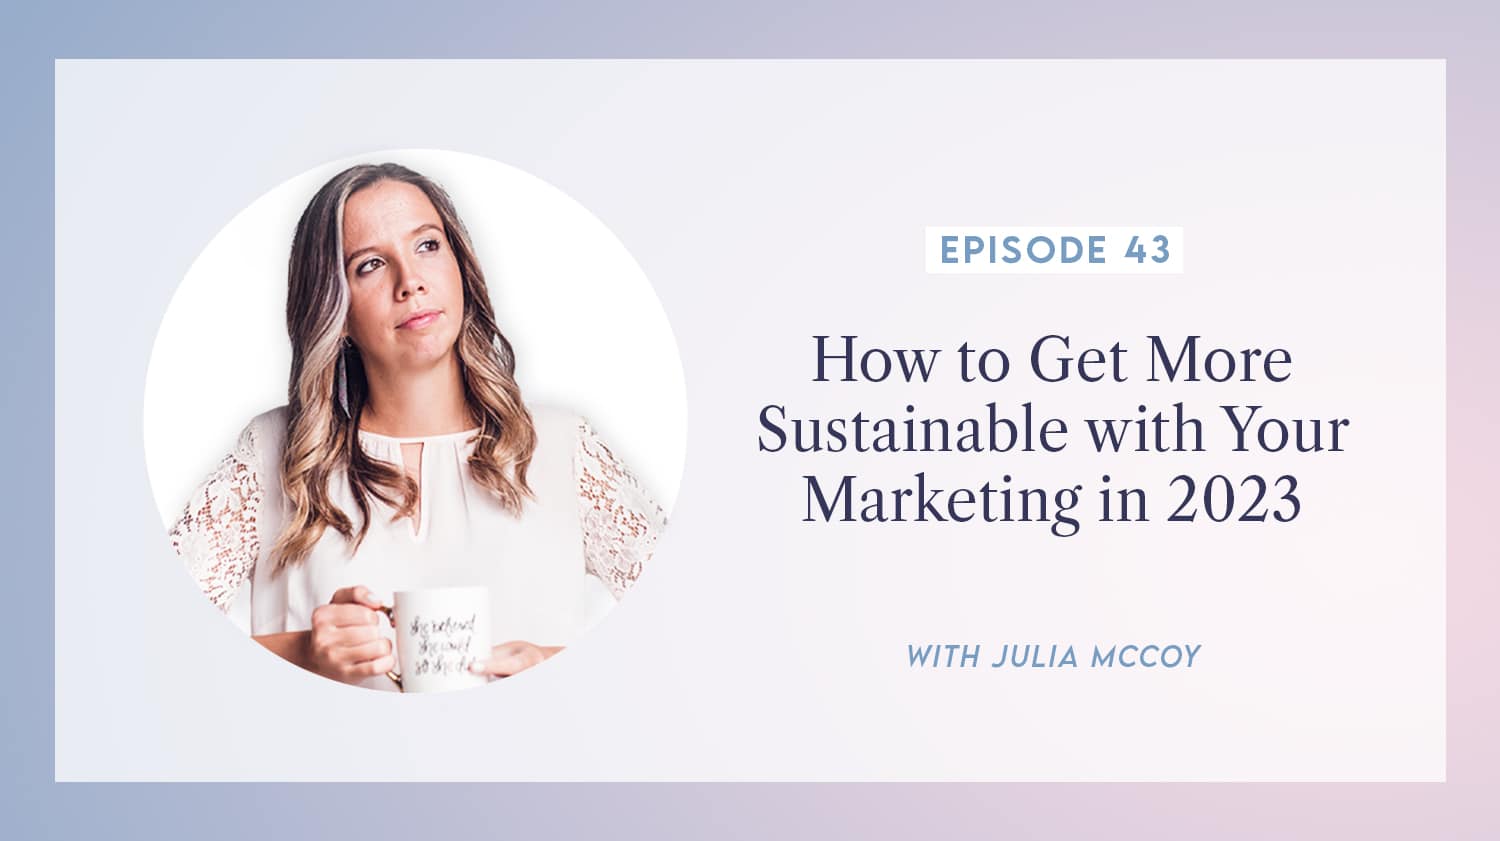 content transformation podcast with julia mccoy episode 43 how to get more sustainable with your marketing in 2023